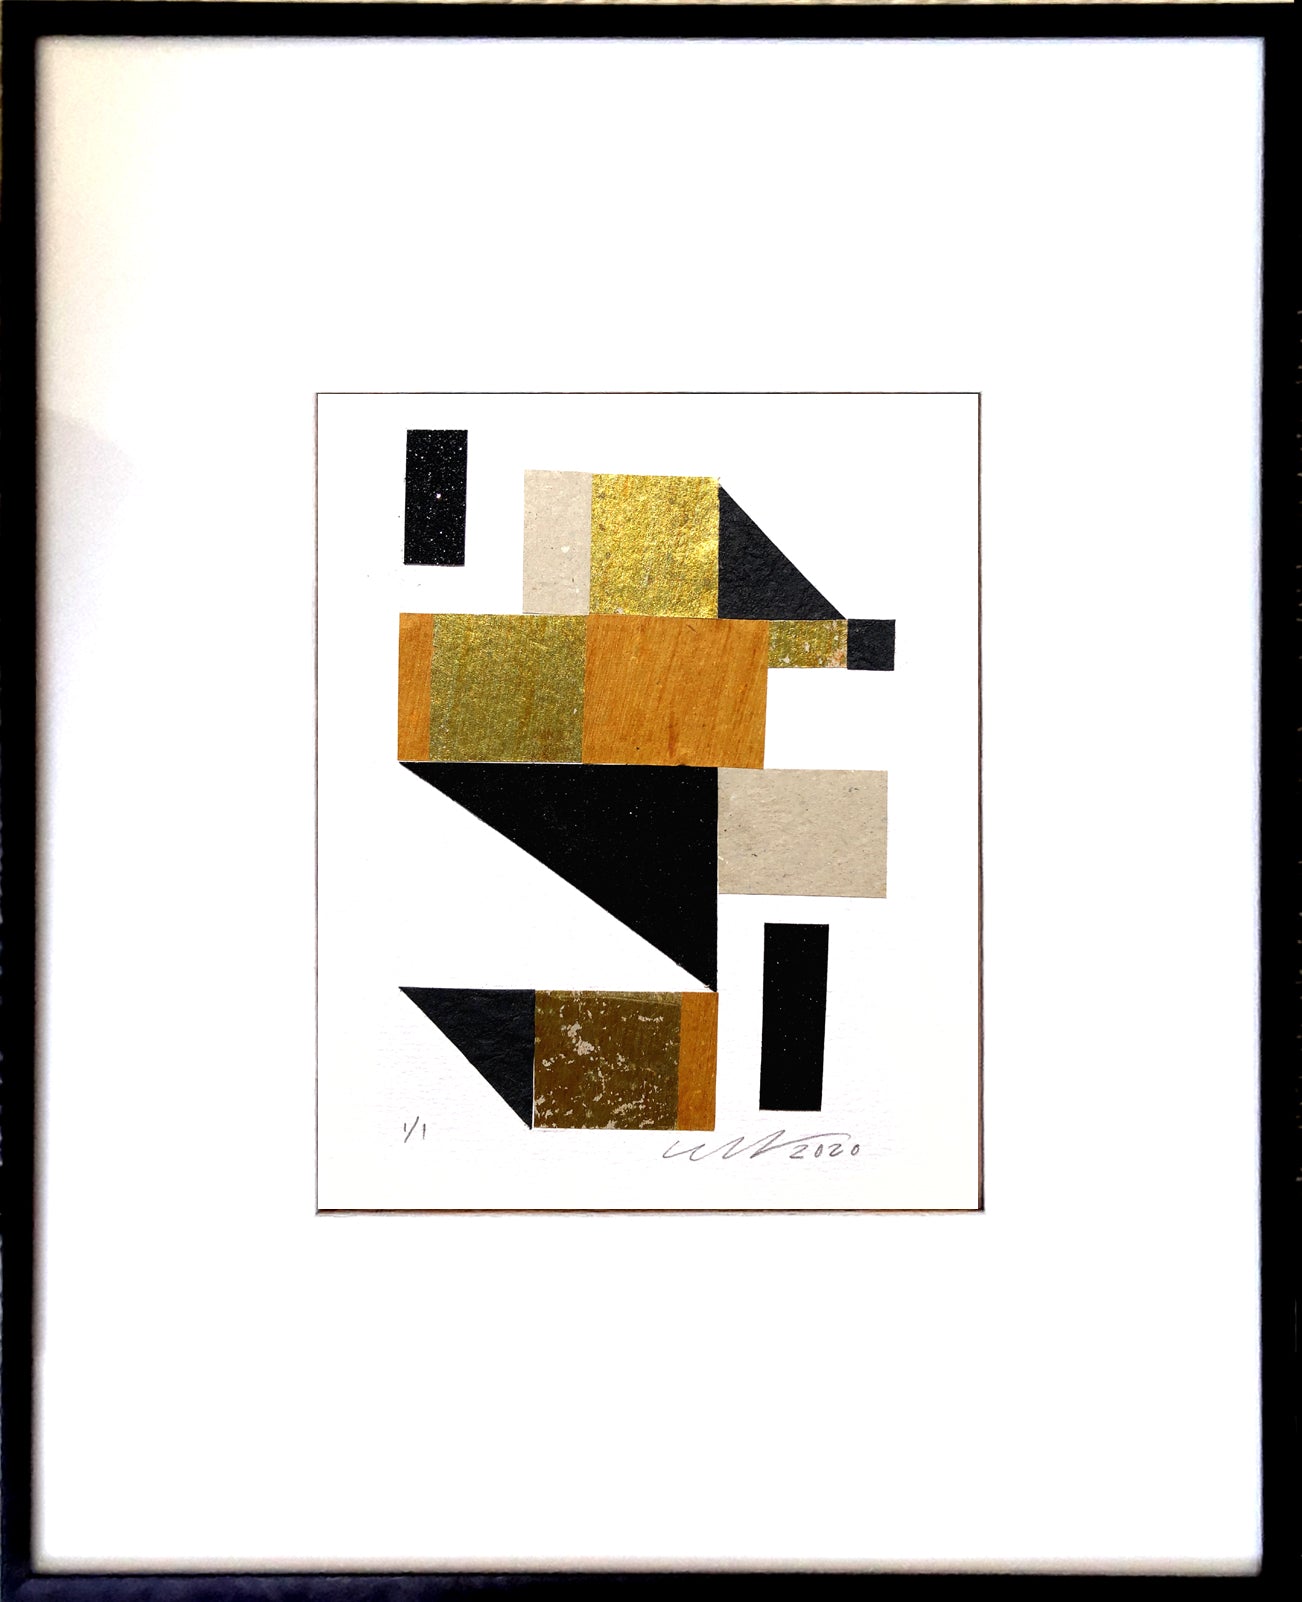 Stairway Abstract Collage feaures bright goldtone foils, matte and glitter black geometric shapes. 13" x 19" Black Metal Frame.